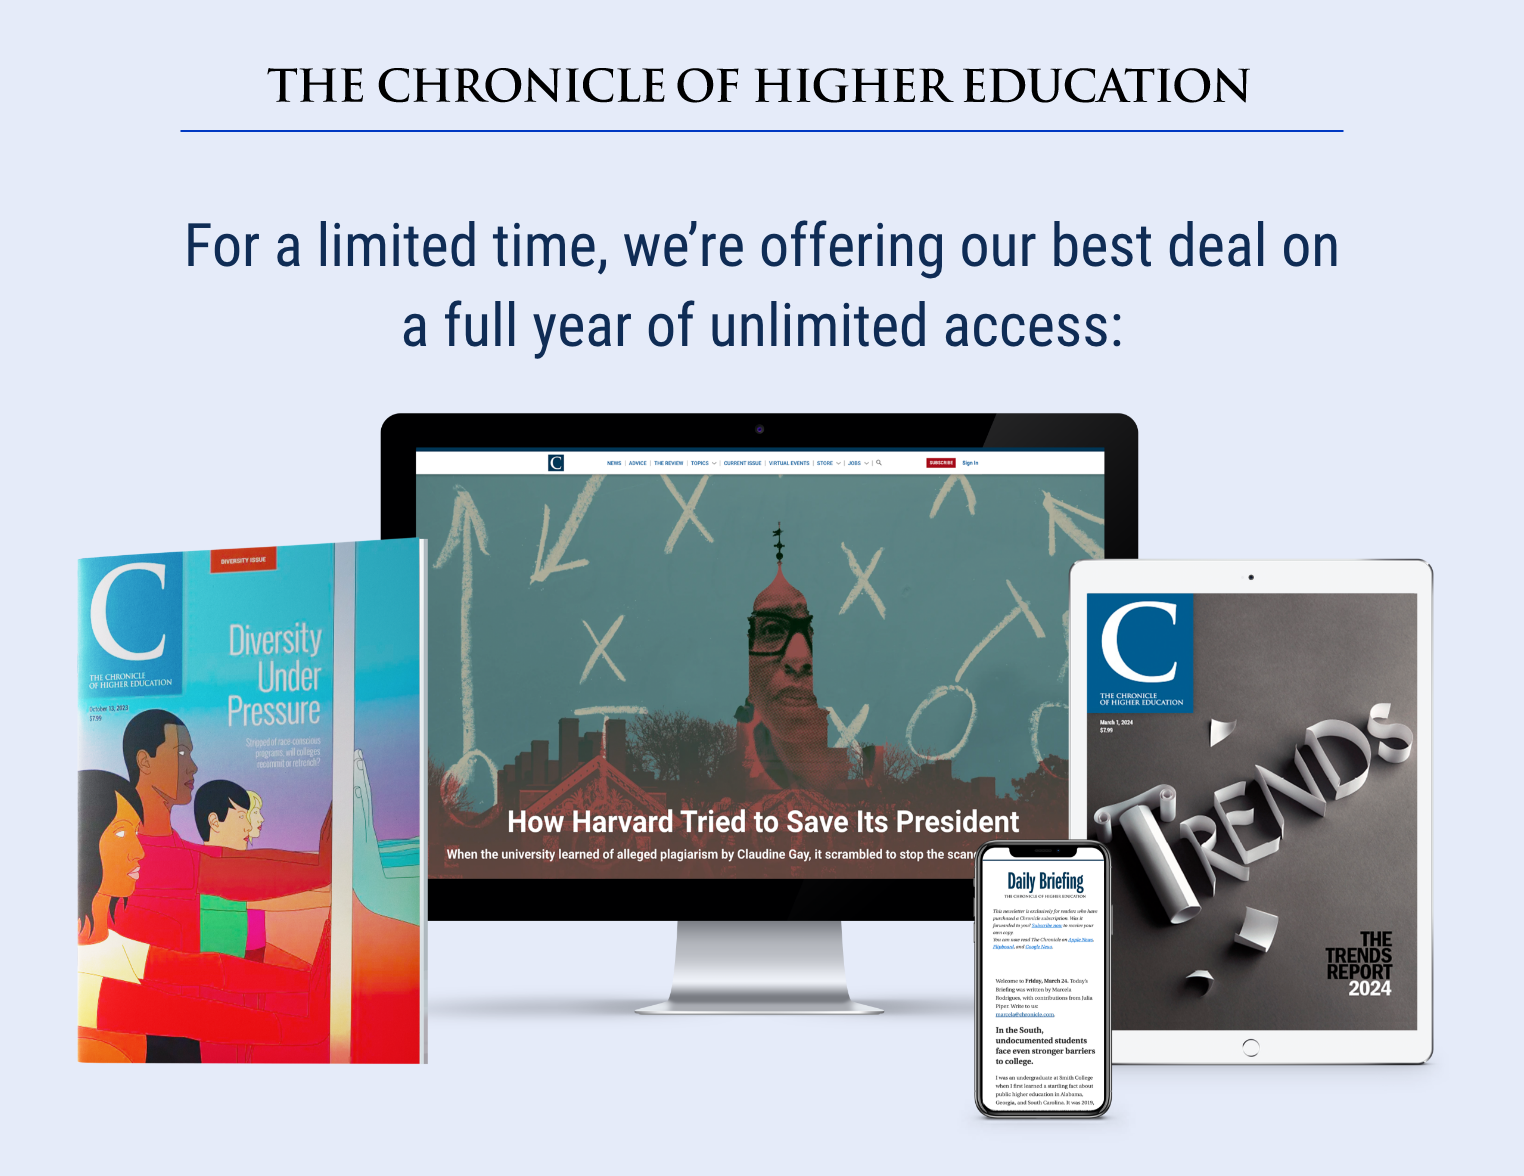 The Chronicle of Higher Education: For a limited time we're offering our best deal on a full year of unlimited access.